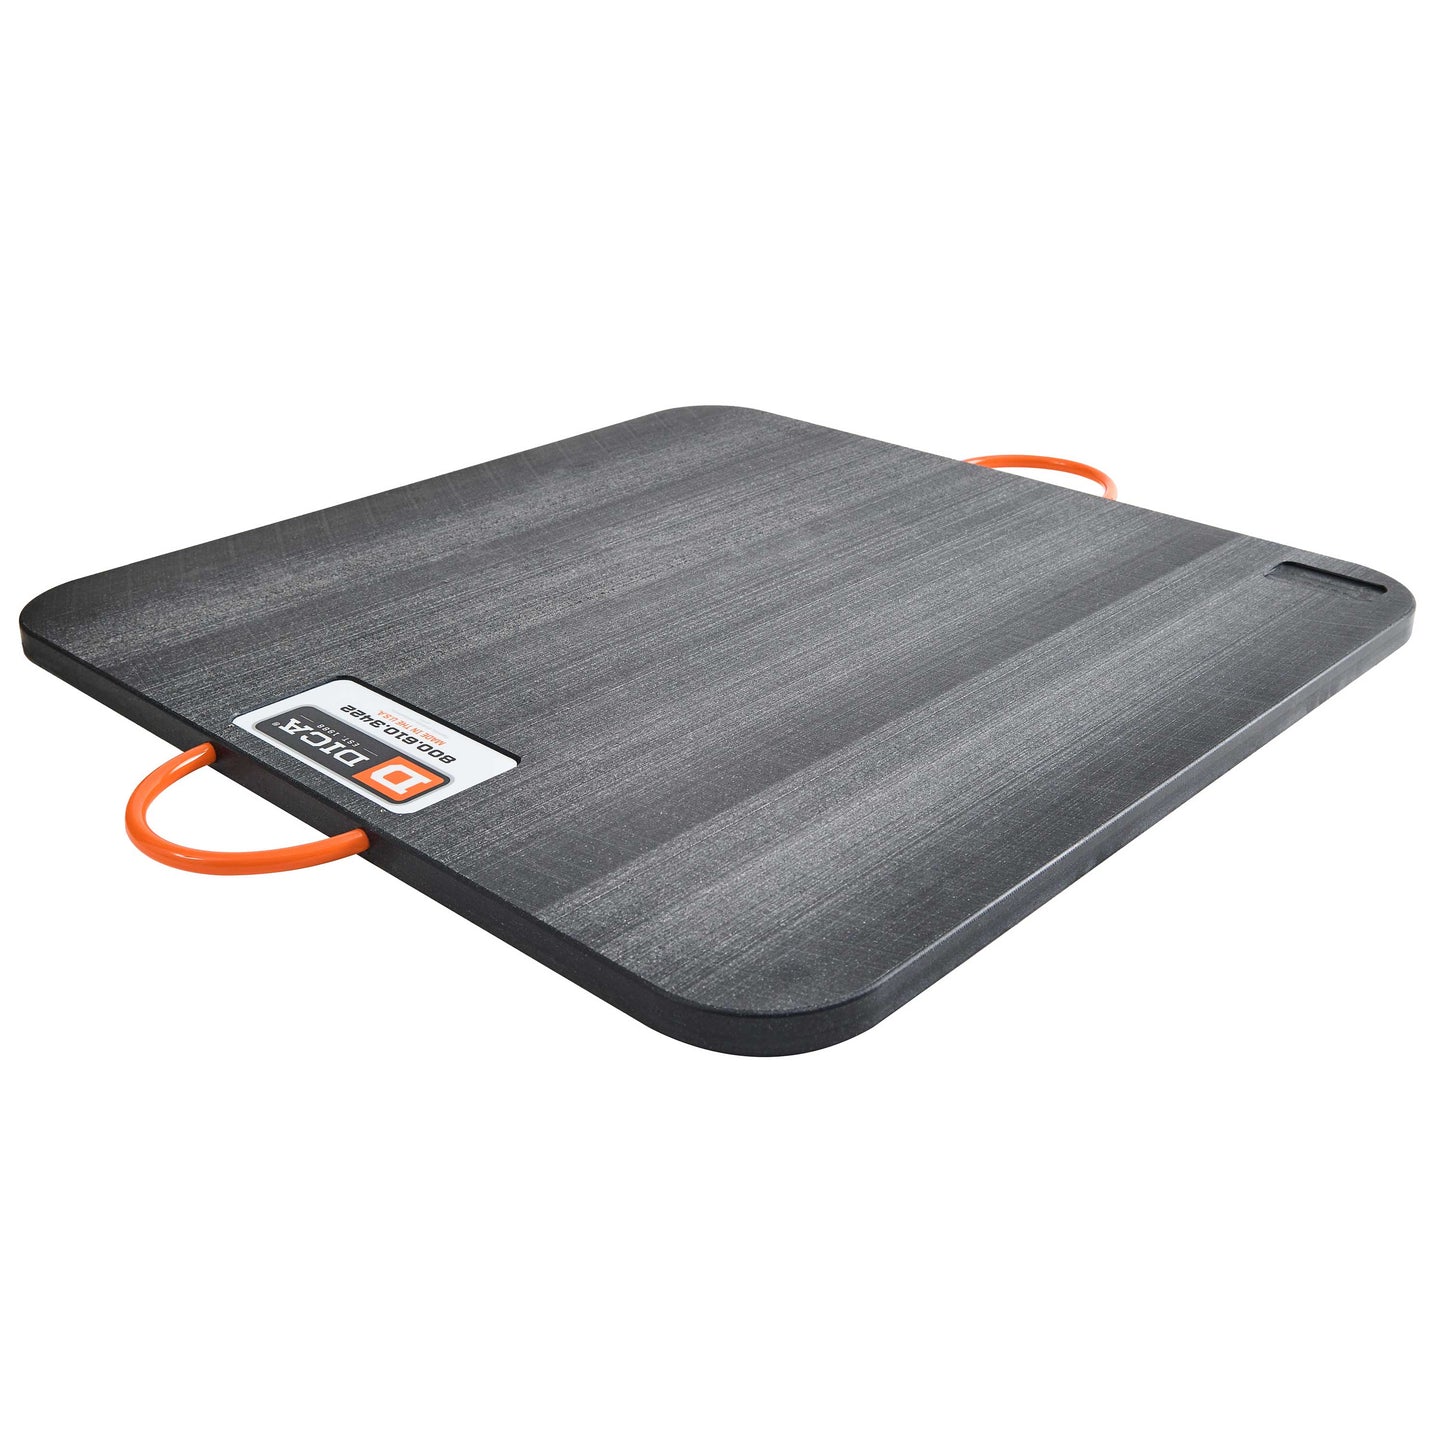 SafetyTech® 30" x 30" Outrigger Pad | Medium Duty | 1" Thick | Black Image 3 of 3